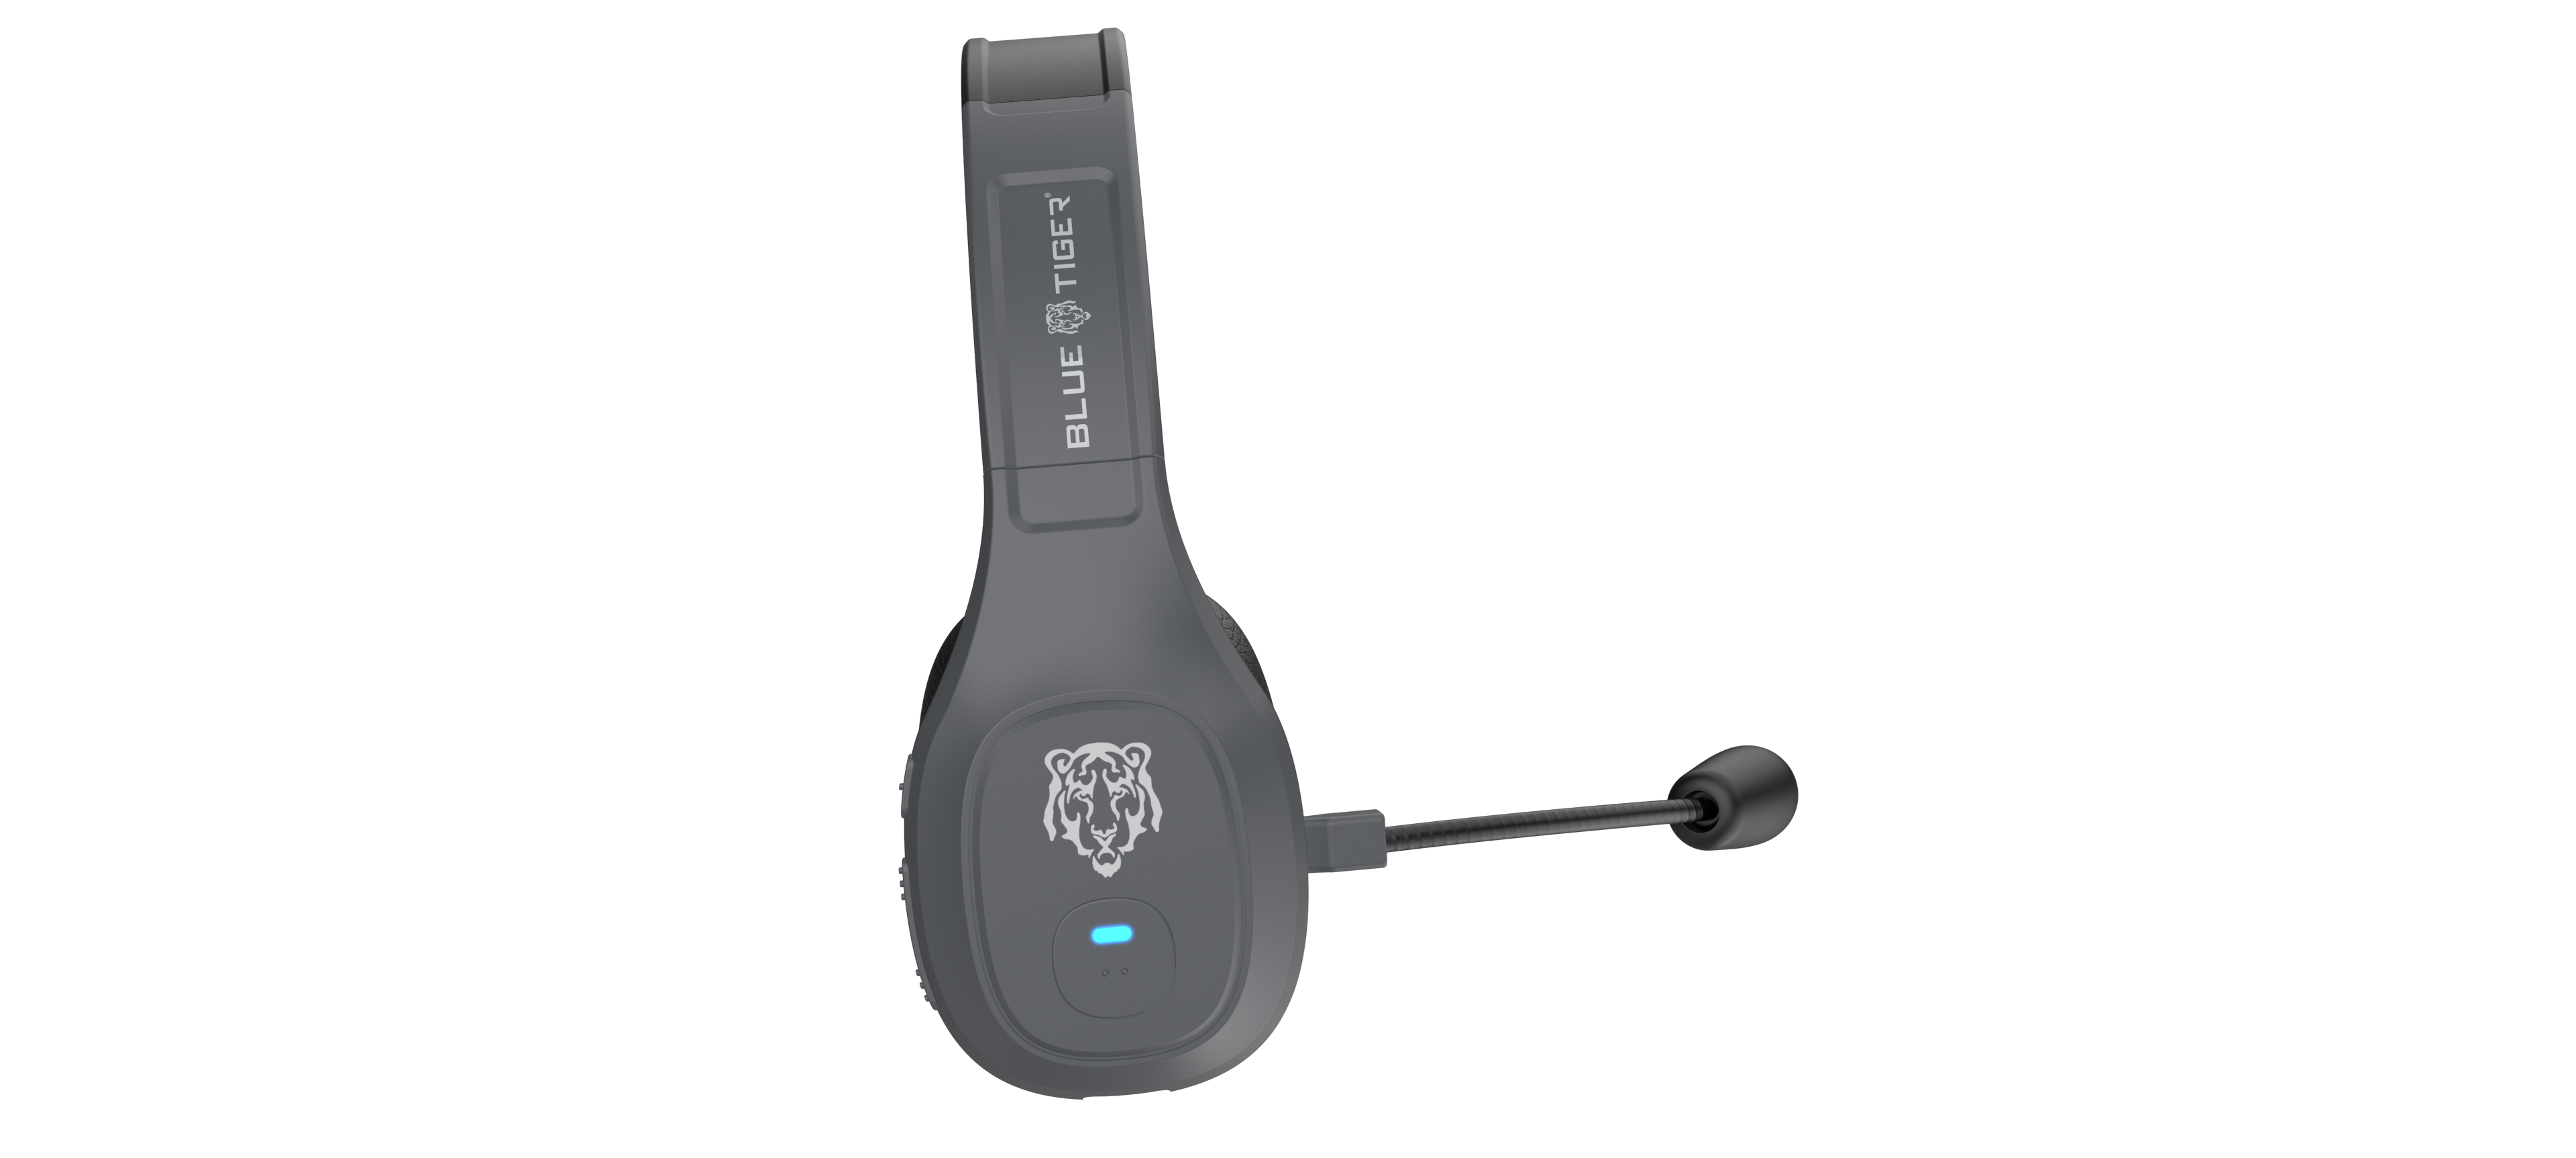 The Storm, Single Ear, Noise Cancellation Bluetooth Headset with Microphone  : A. T. Guys, Your Access Technology Experts